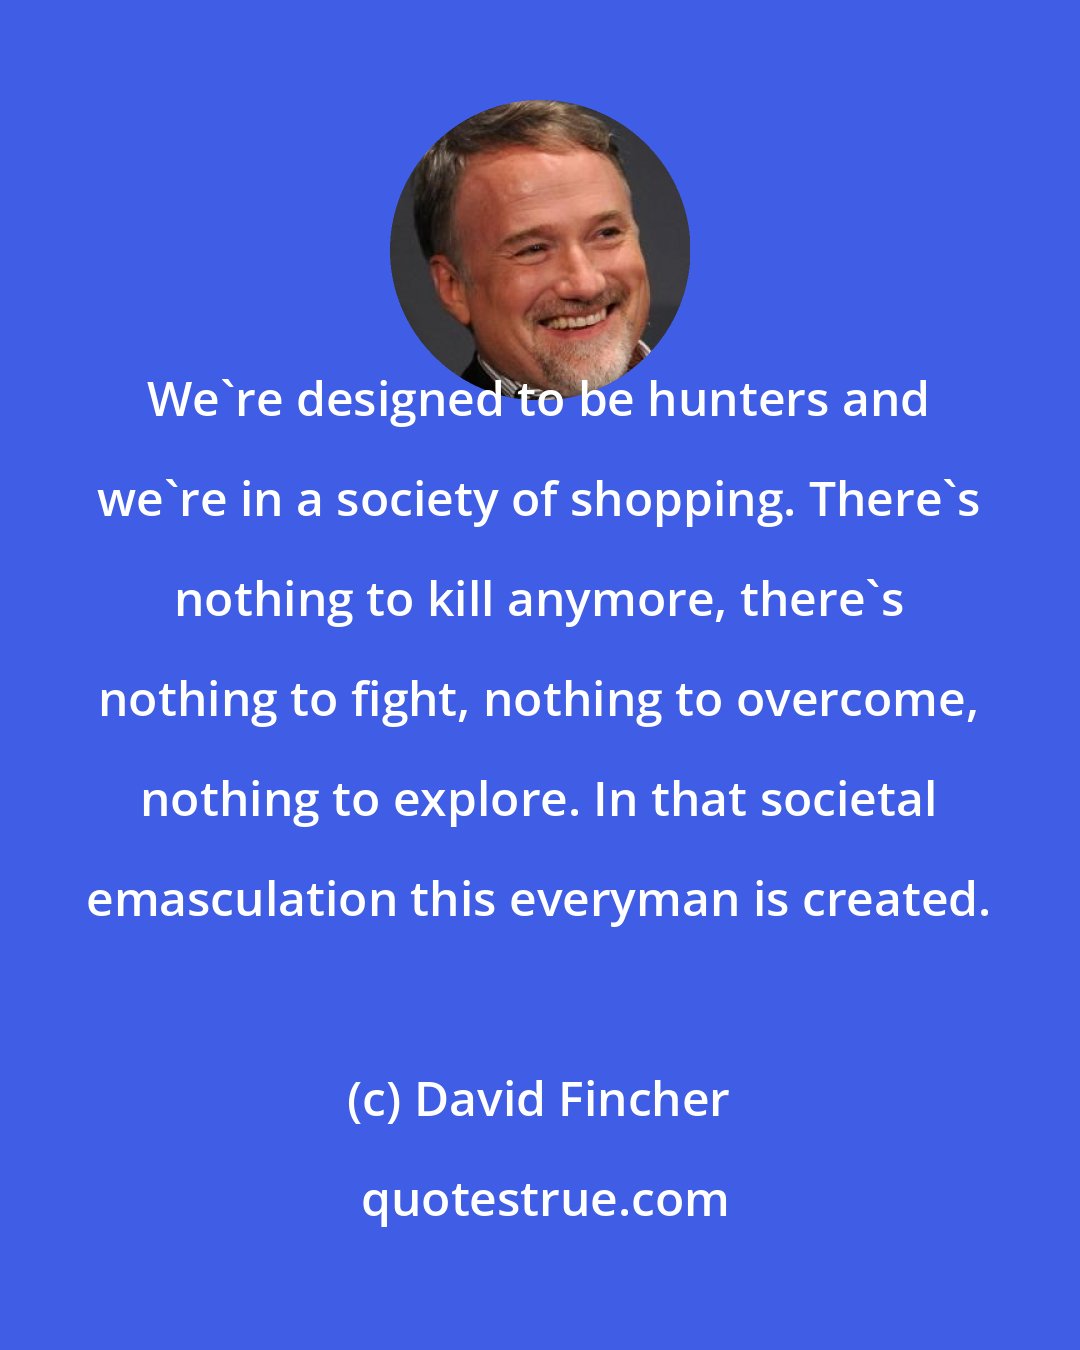 David Fincher: We're designed to be hunters and we're in a society of shopping. There's nothing to kill anymore, there's nothing to fight, nothing to overcome, nothing to explore. In that societal emasculation this everyman is created.